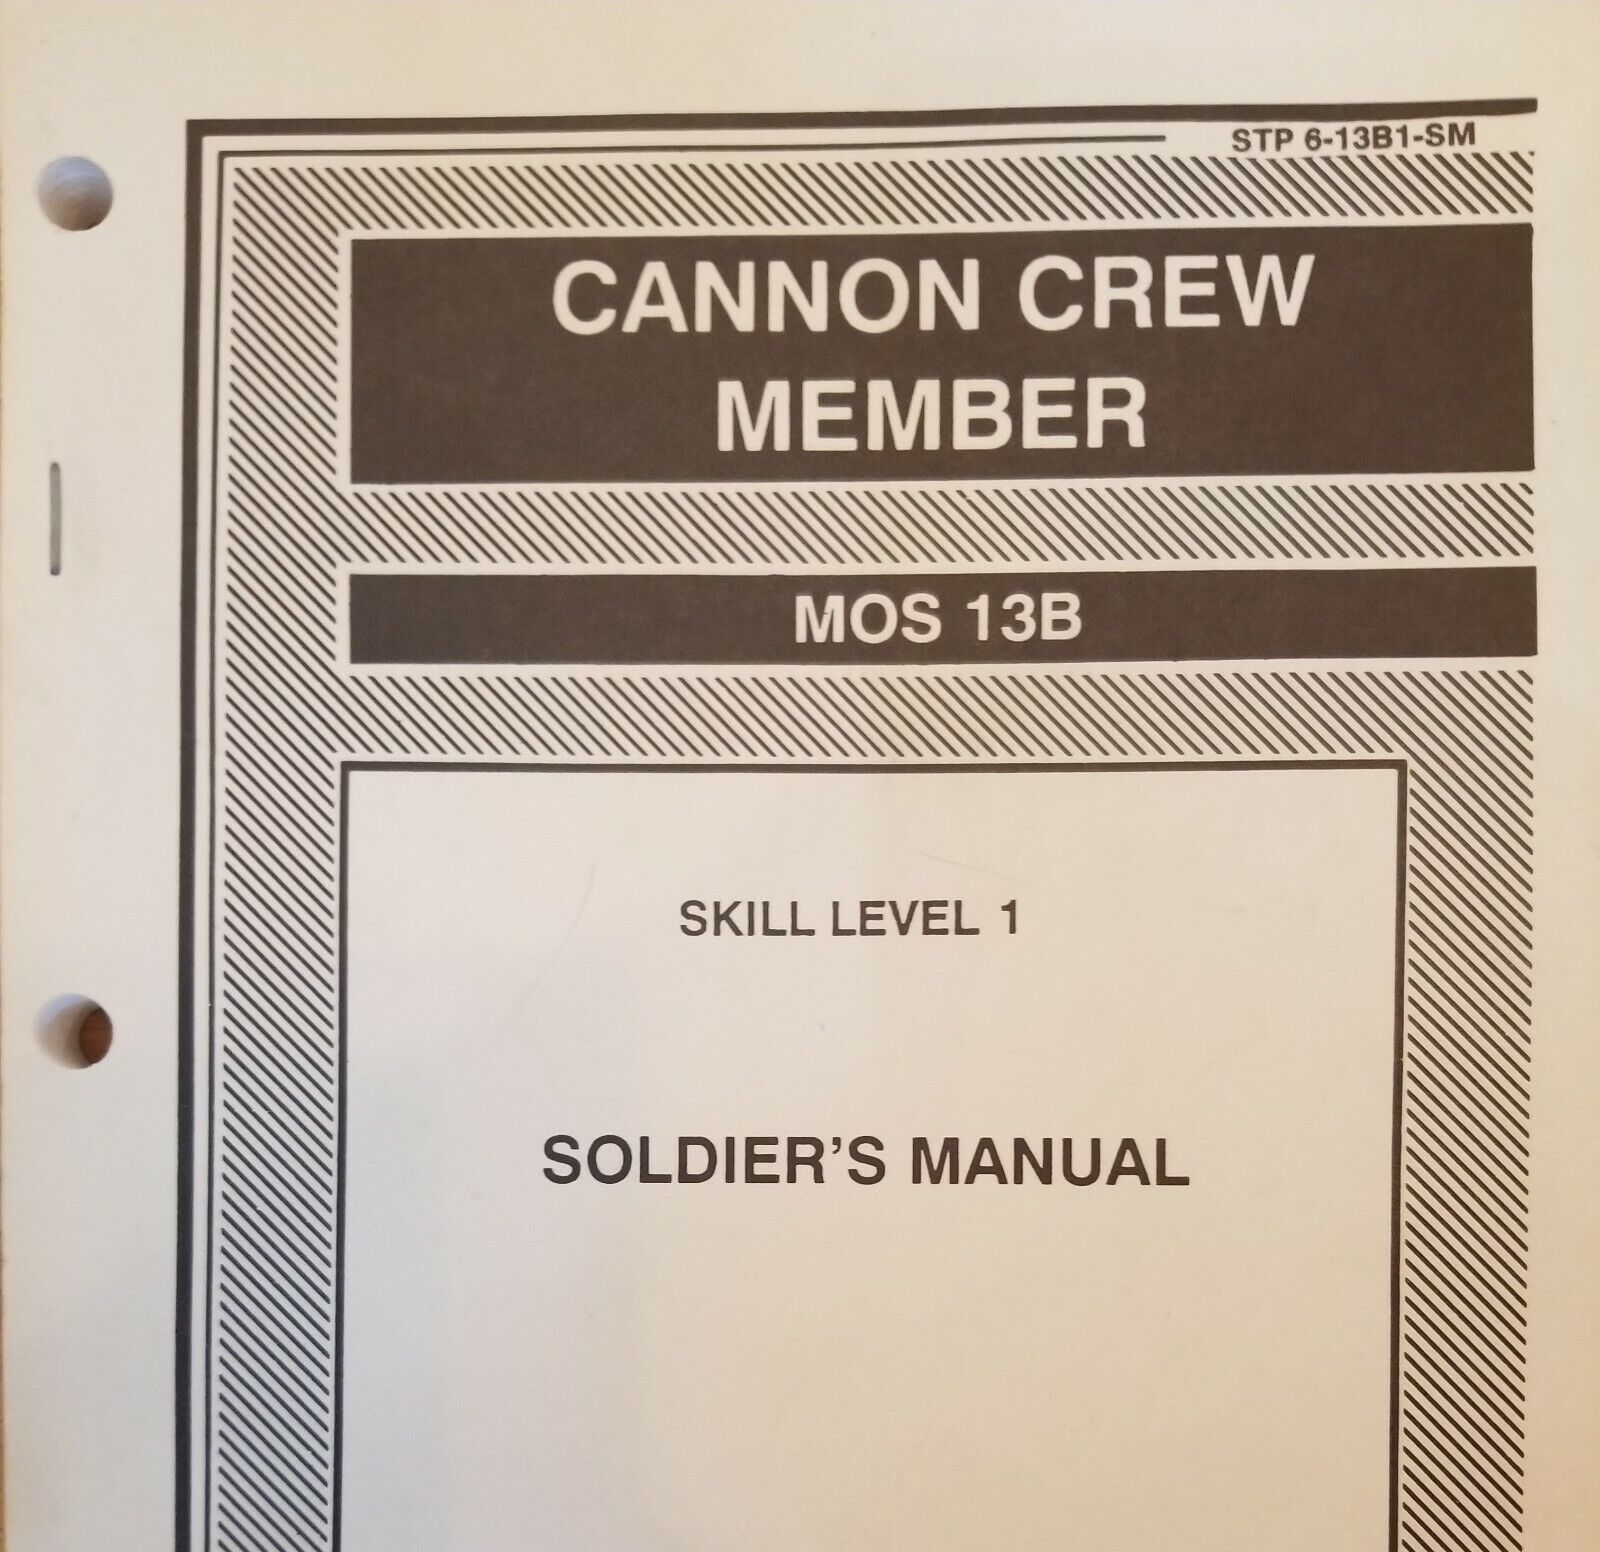 STP 6-13B1-SM Cannon Crew Member MOS 13B, Skill Level 1 Soldier's Manual, 1993